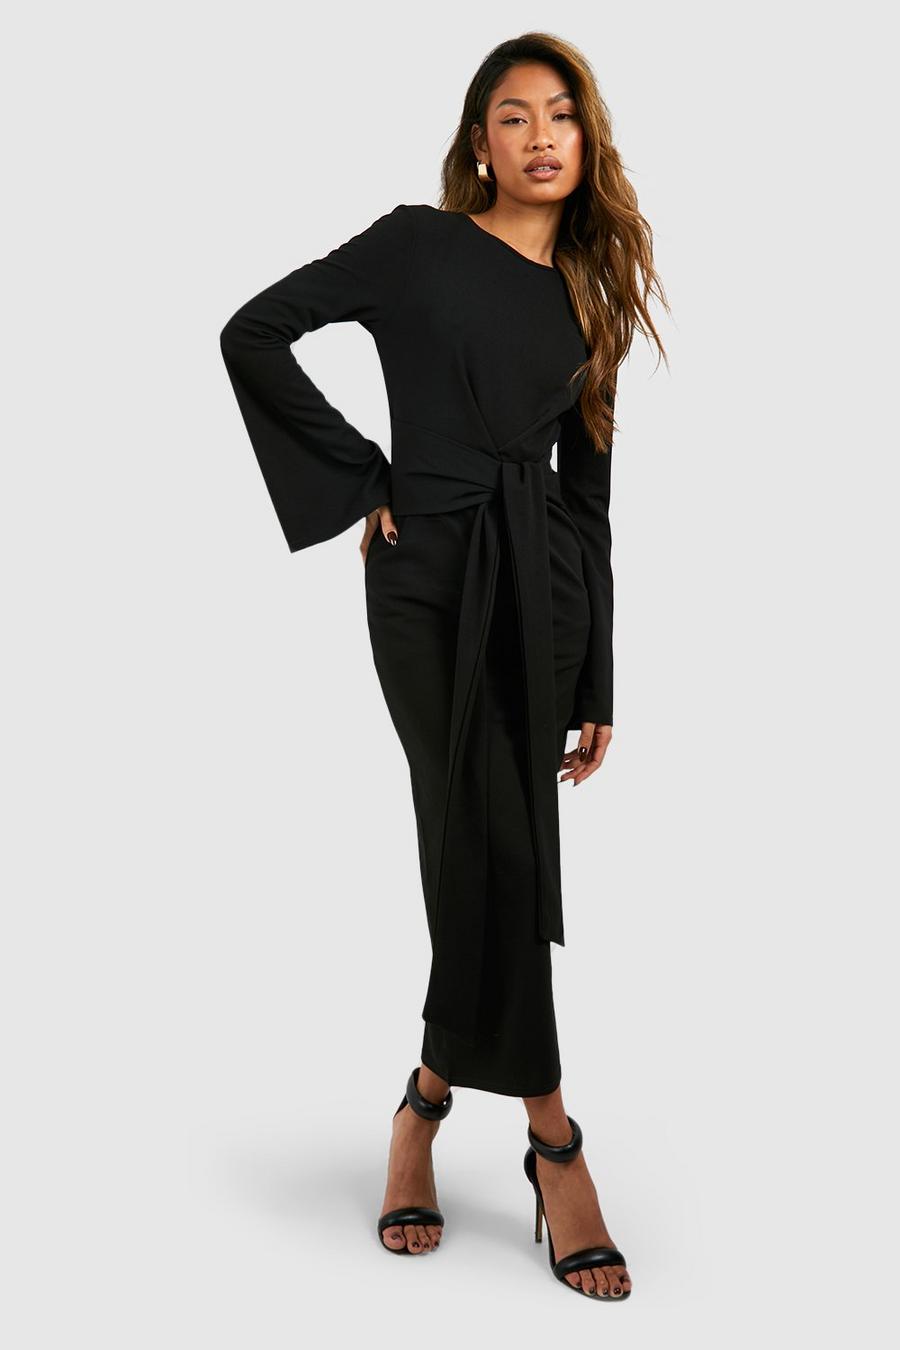 Black Knot Front Flared Sleeve Crepe Midaxi Dress